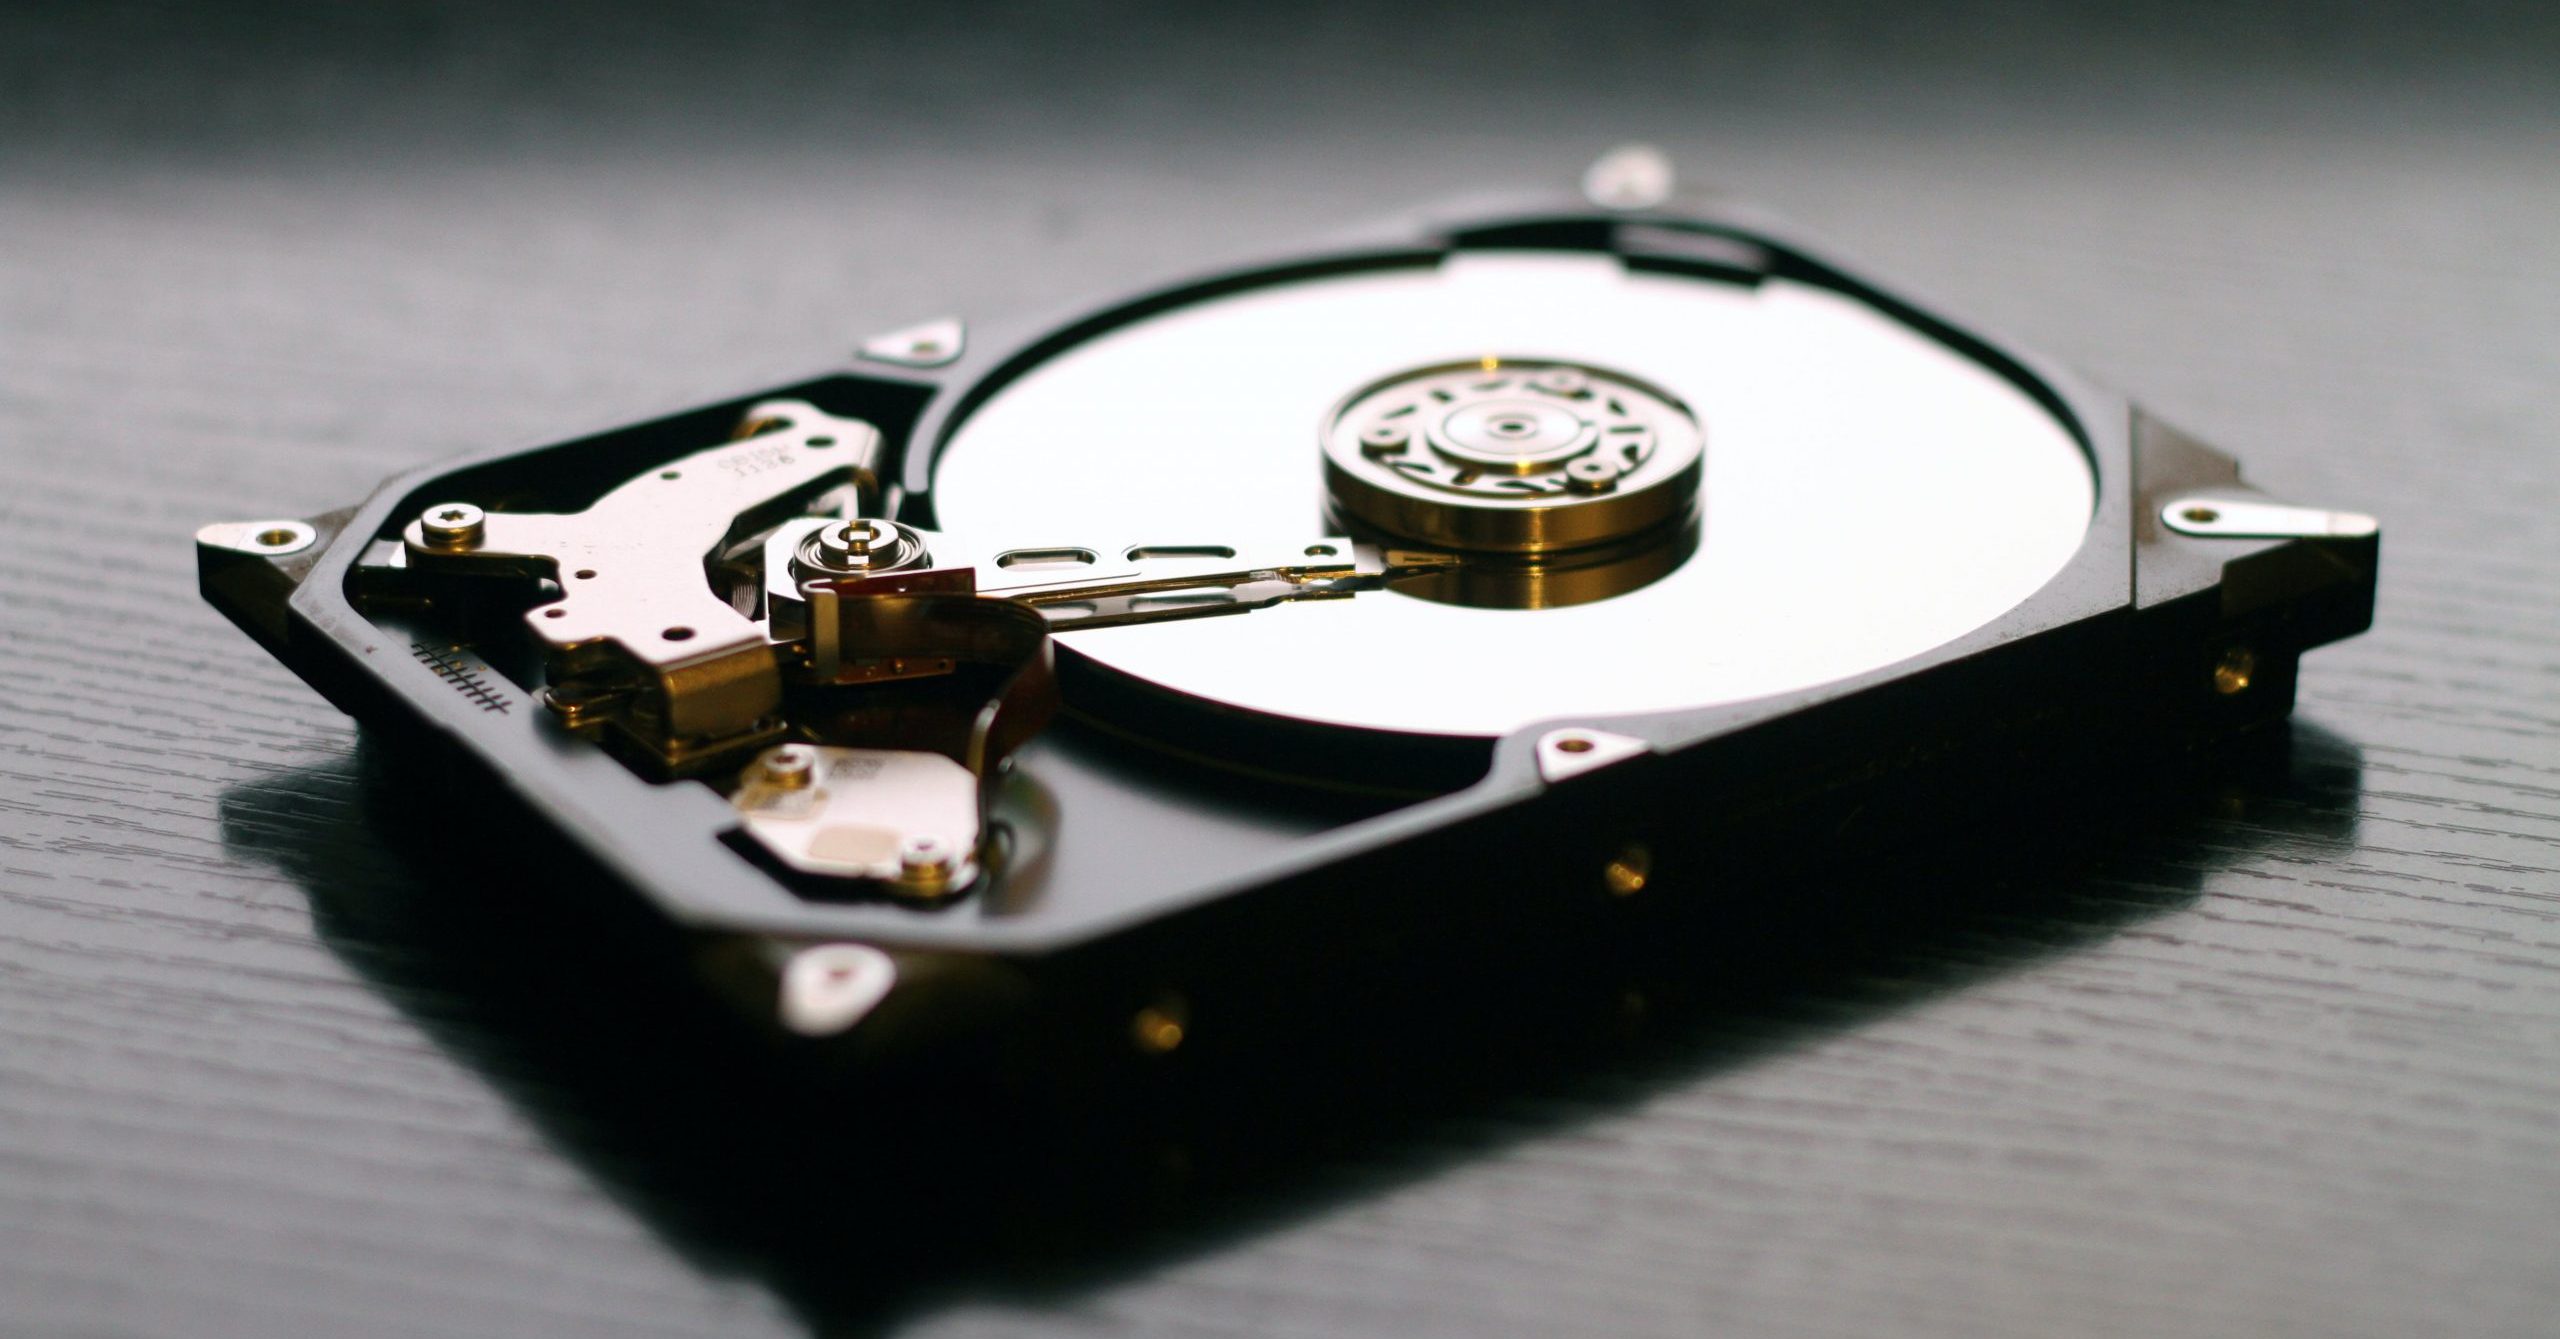 How Does a Hard Drive Work?